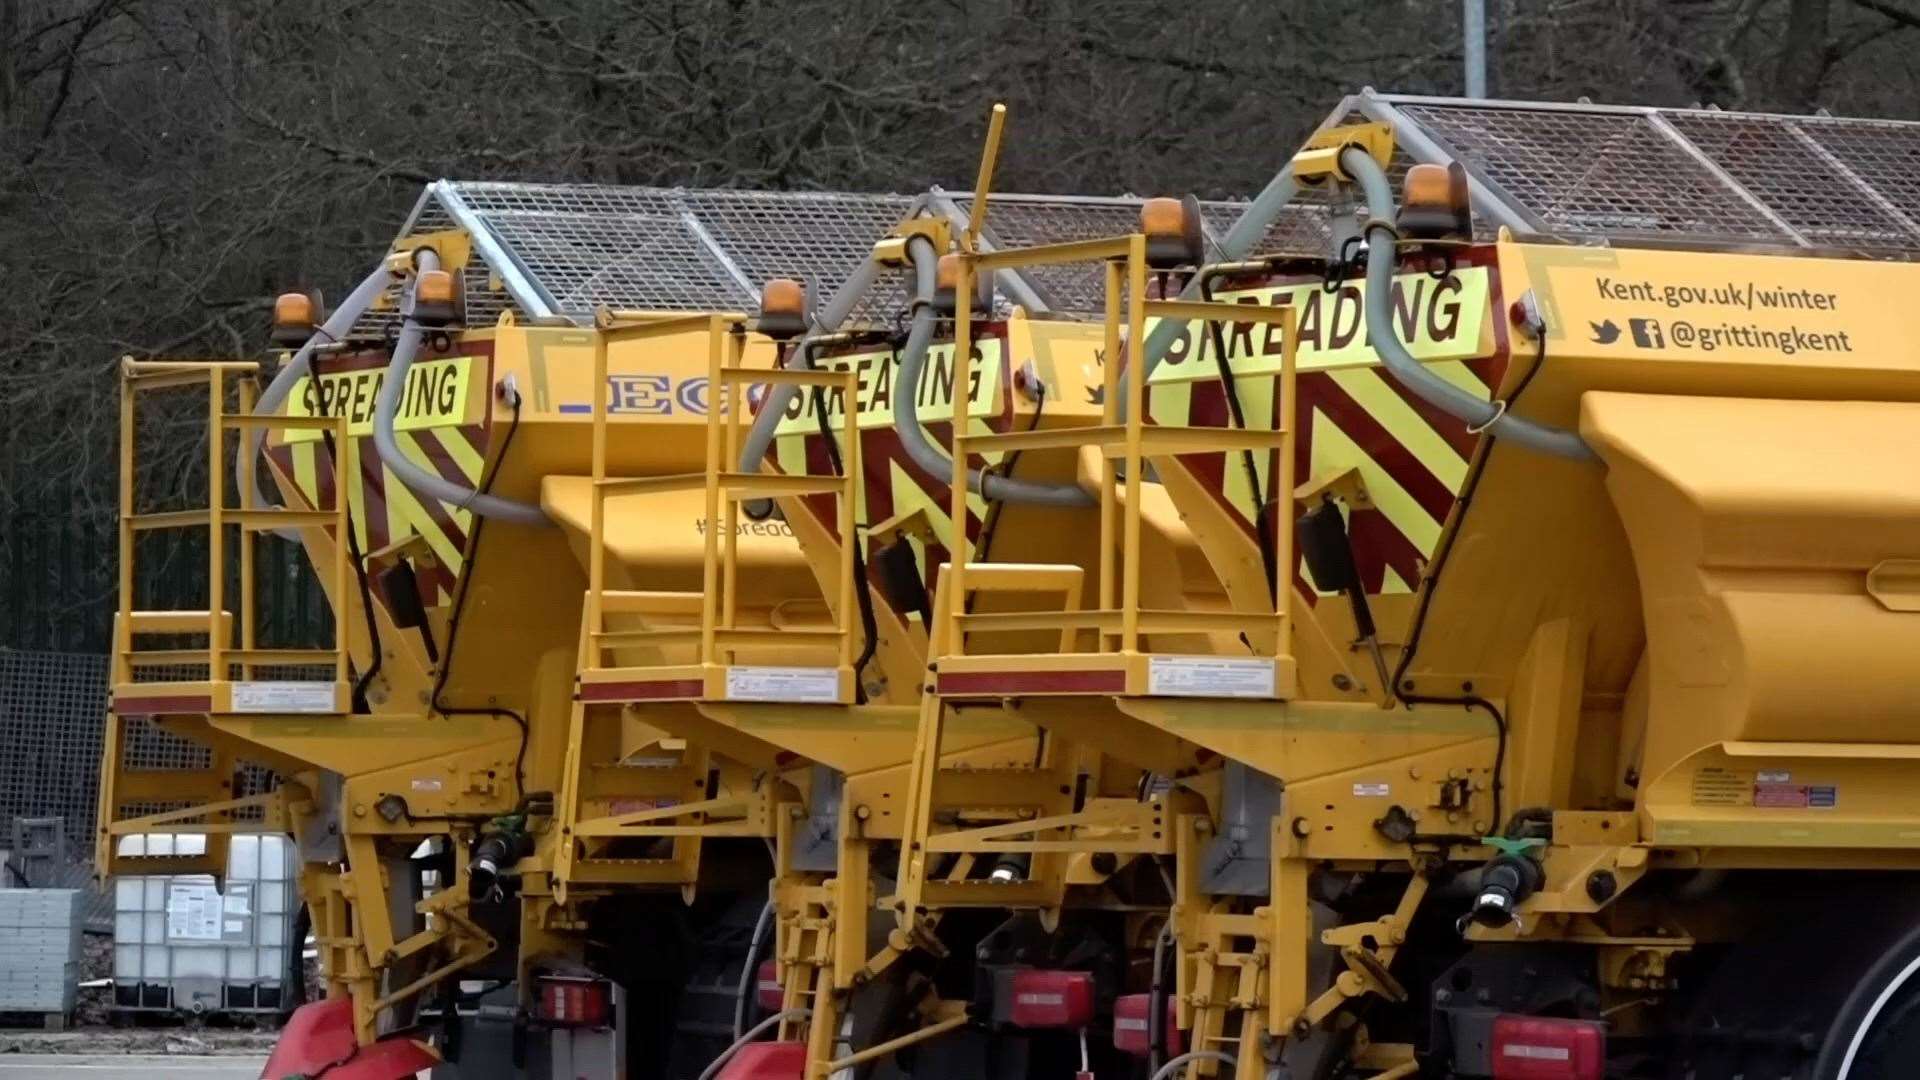 Gritting Kent has reassured residents that the roads will be cleared this winter